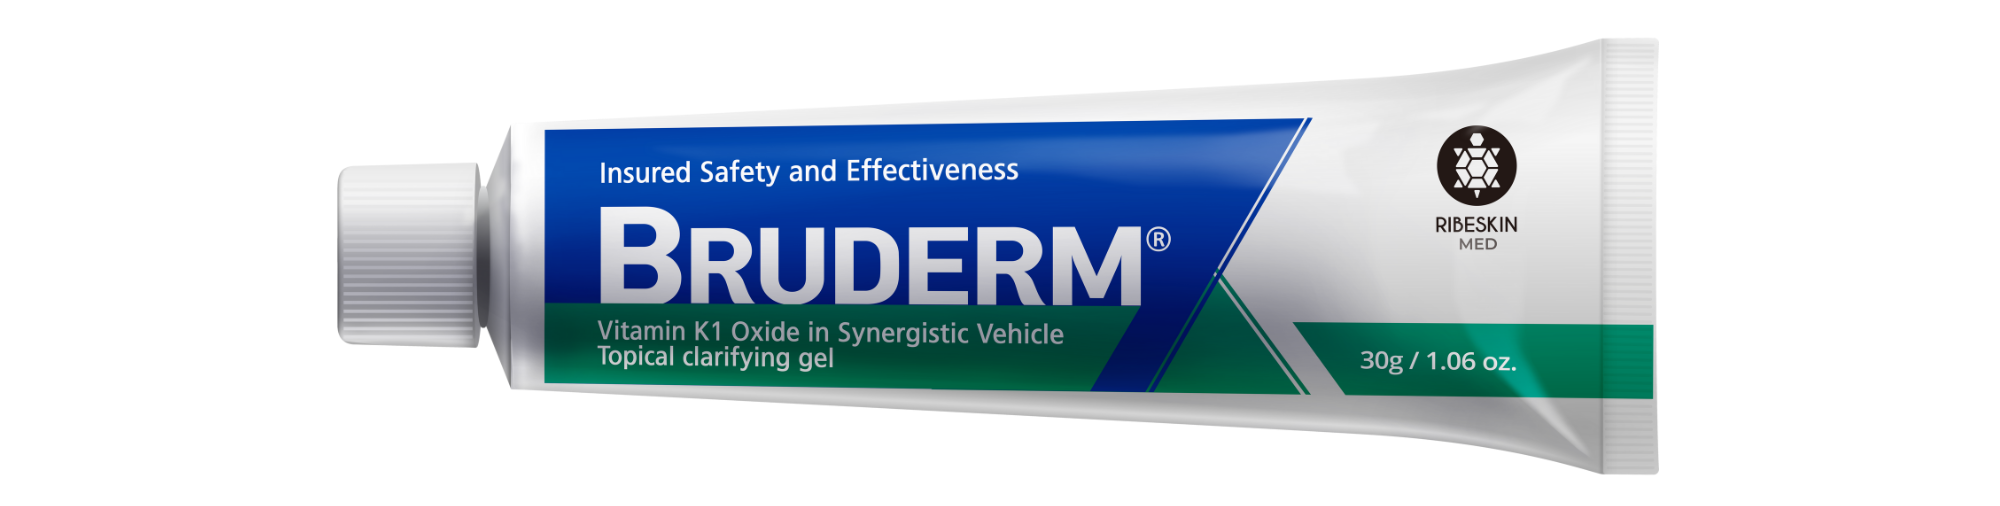 RIBESKIN bruderm cream for bruise and swelling relief after plastic surgery